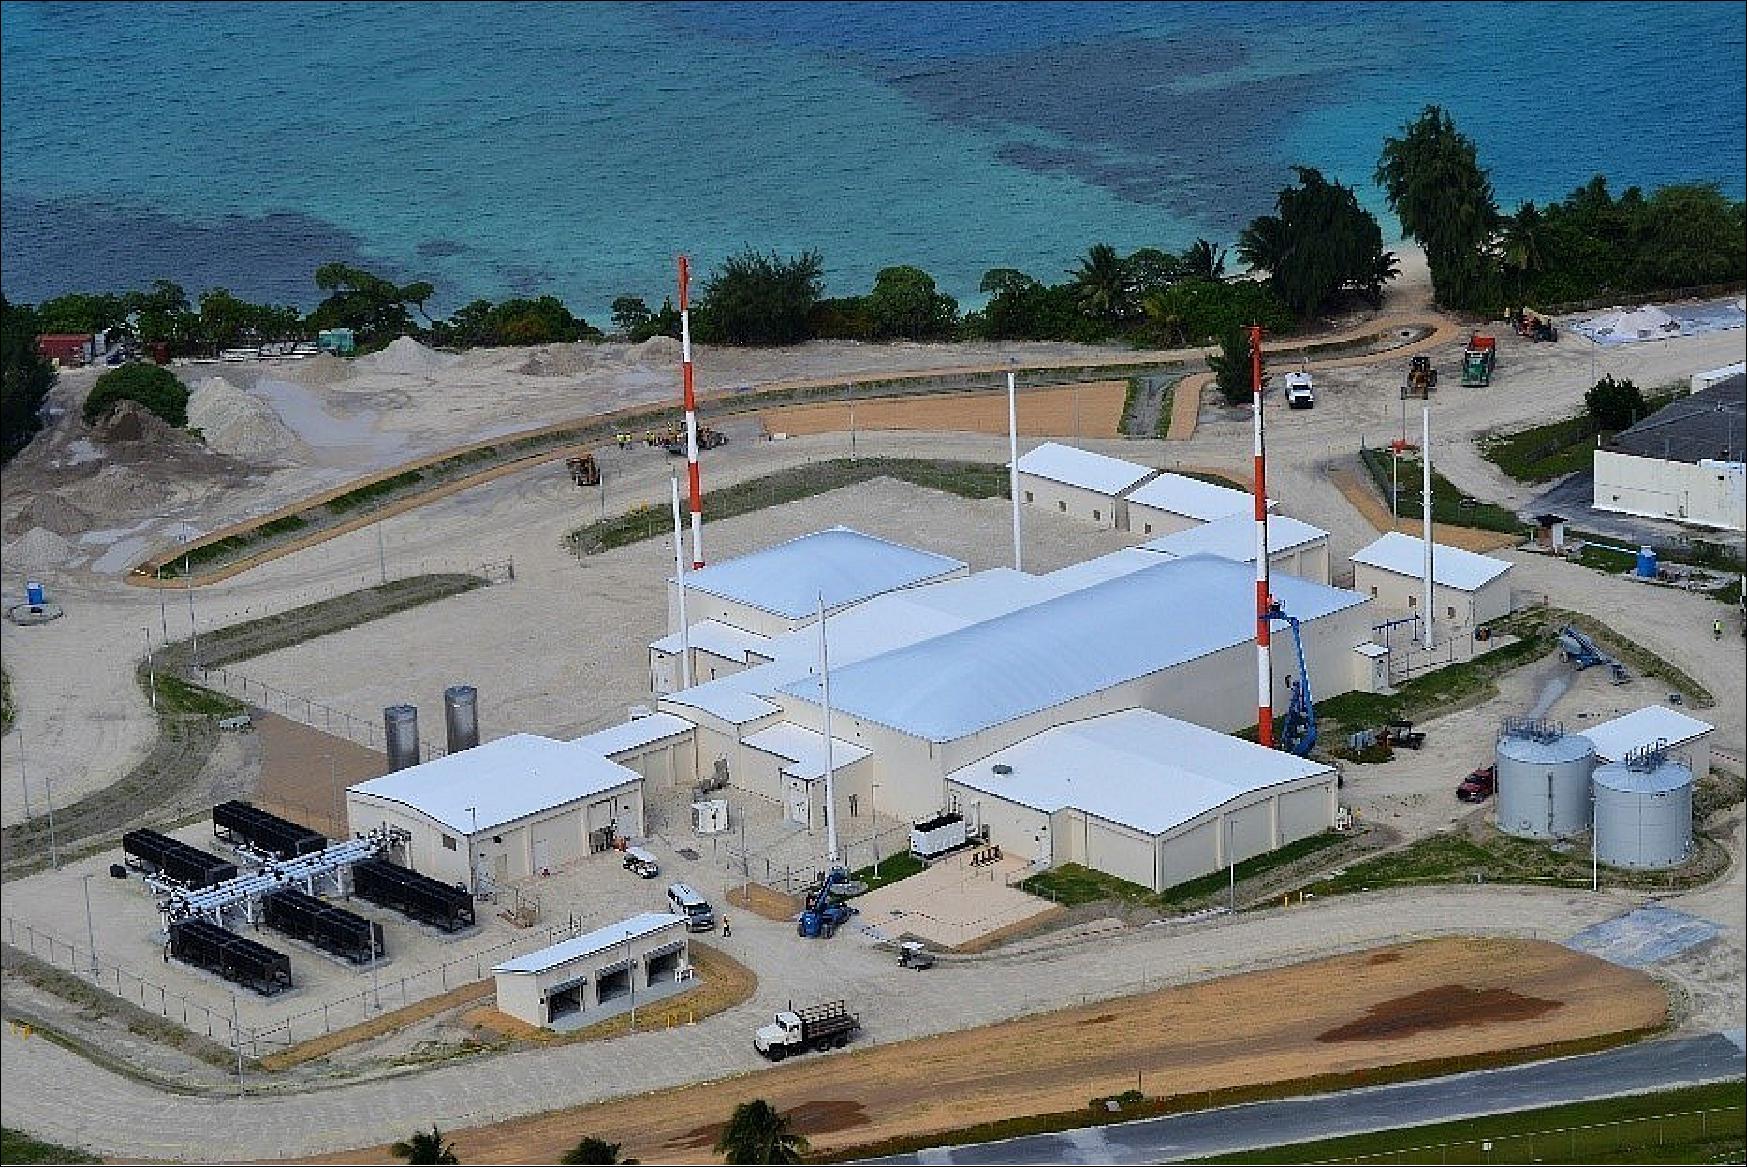 Figure 17: Aerial view of Space Fence facility in Kwajalein Atoll (image credit: Lockheed Martin)